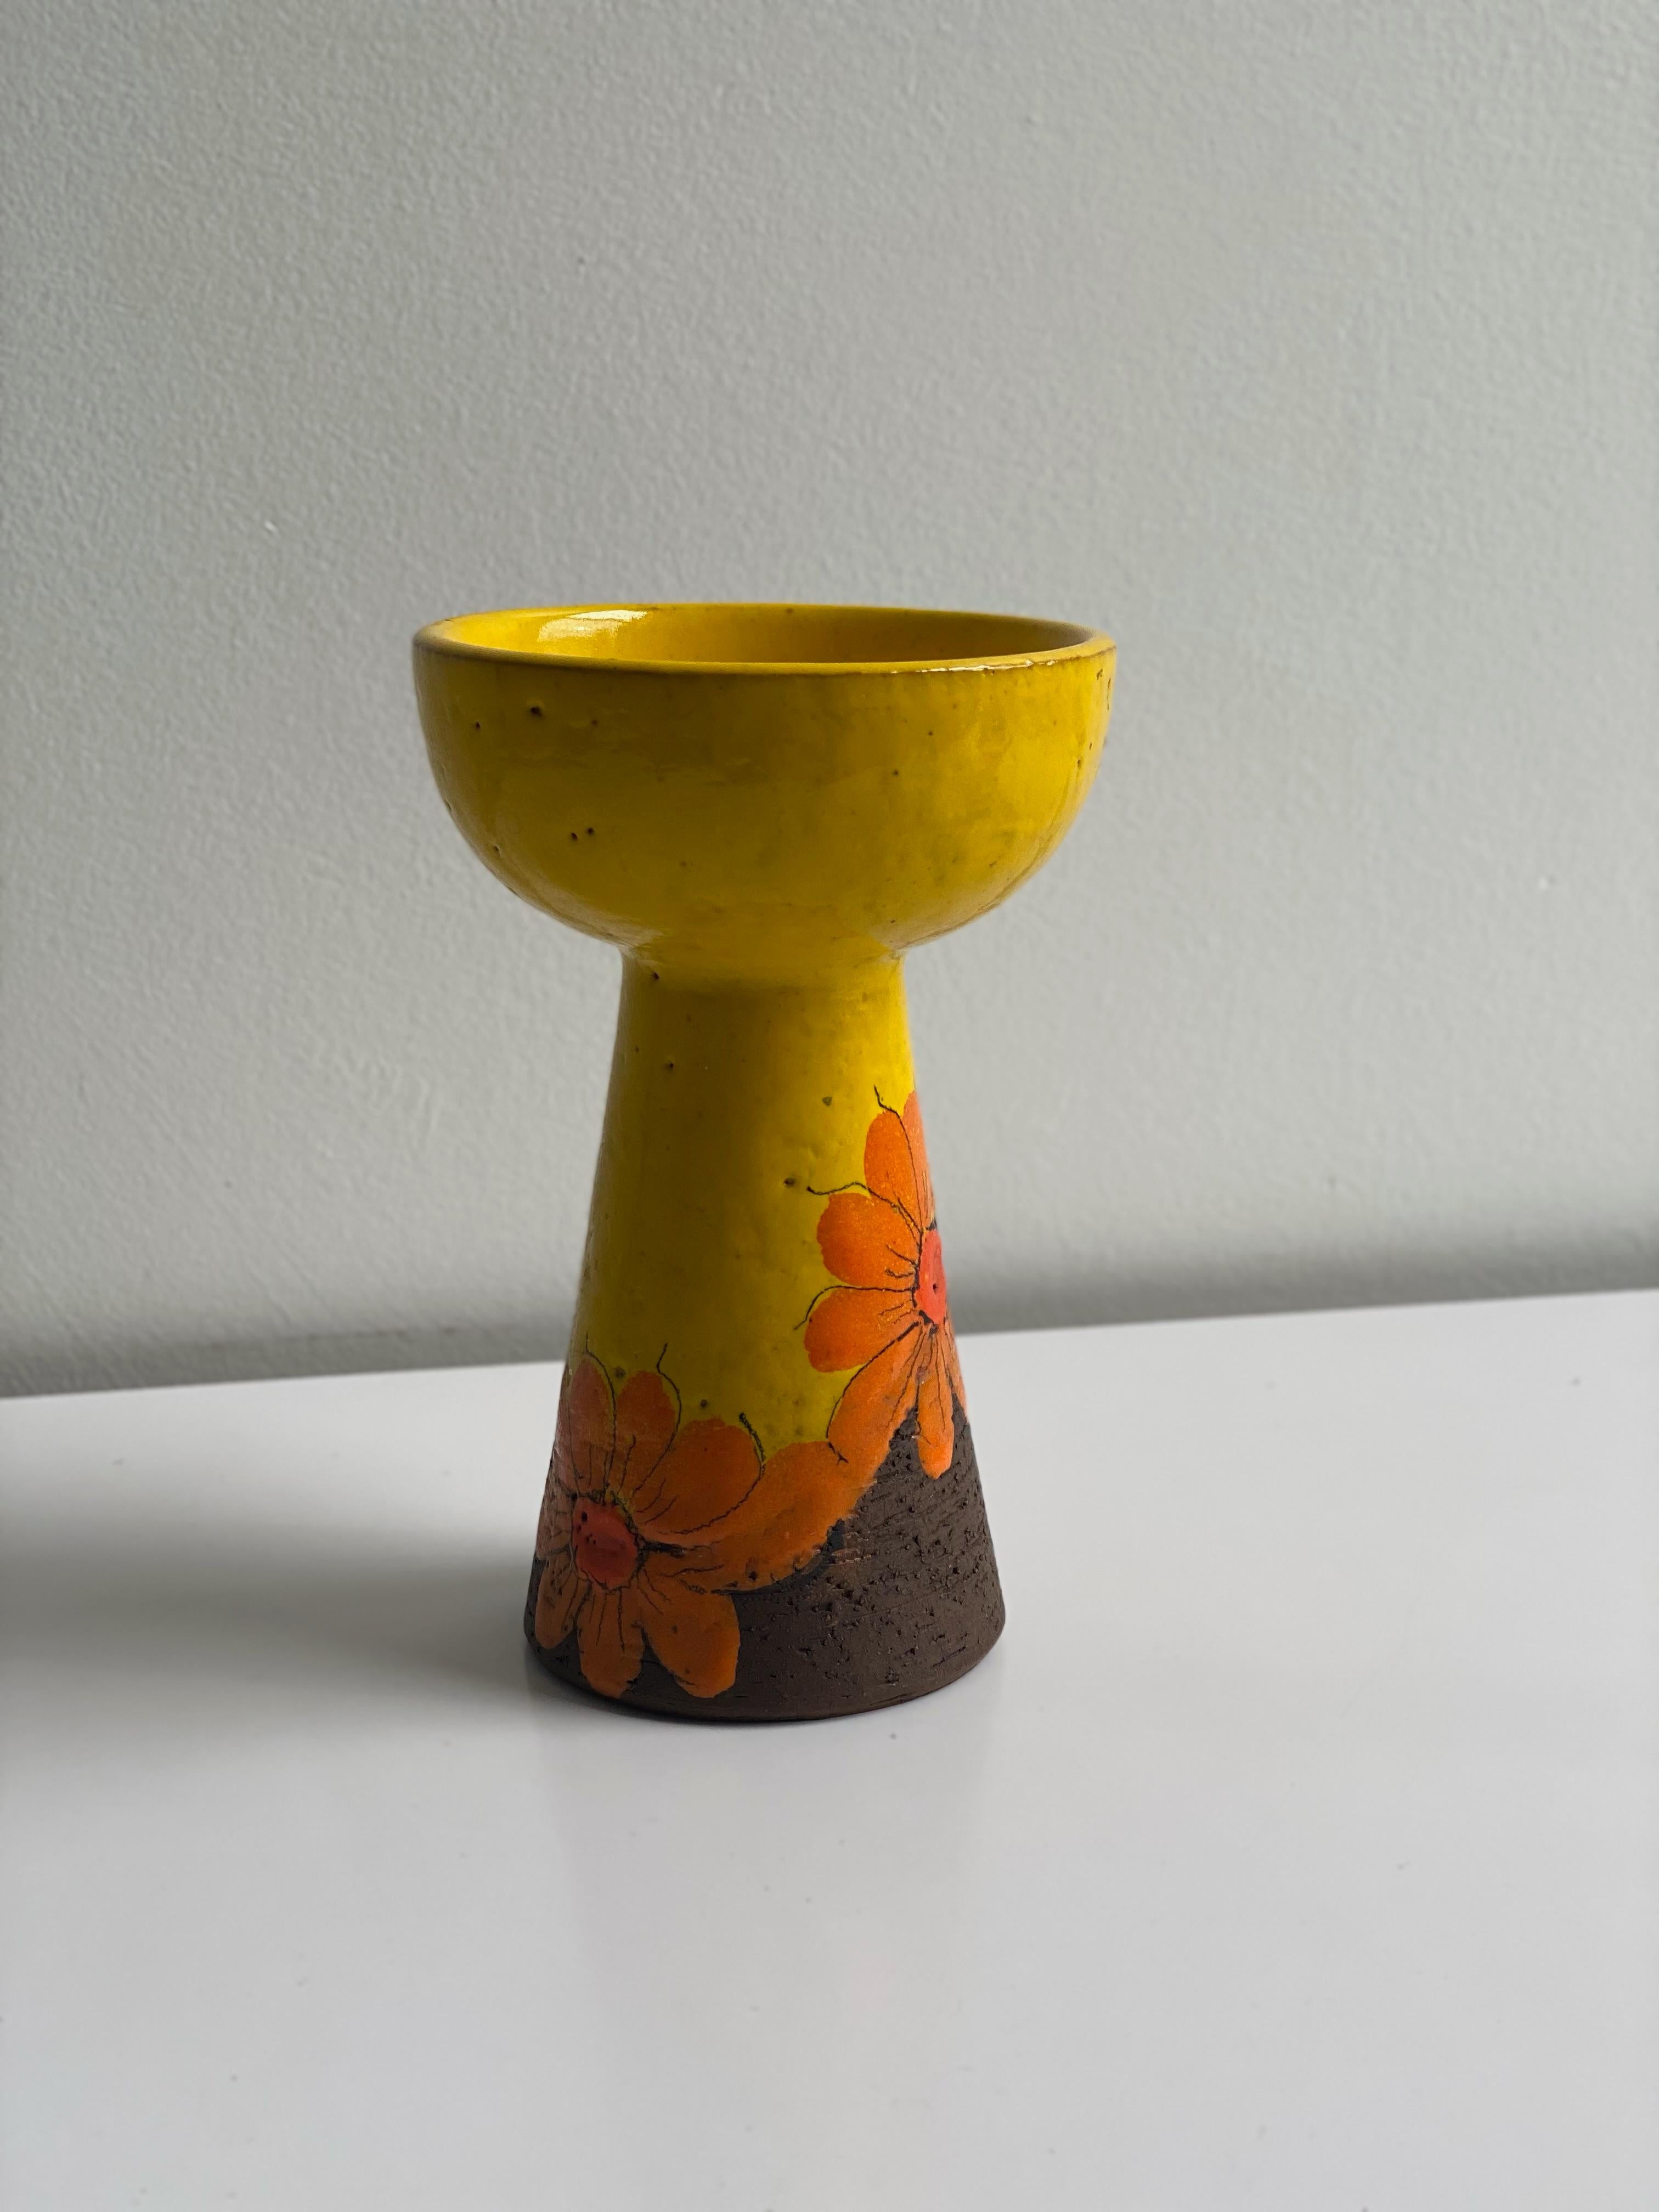 Candleholder by Bitossi Ceramics, imported by Rosenthal Netter and sold at Amram's, a department store in Toronto, Canada. In perfect condition and retains original label. Made in Italy, 1960s.